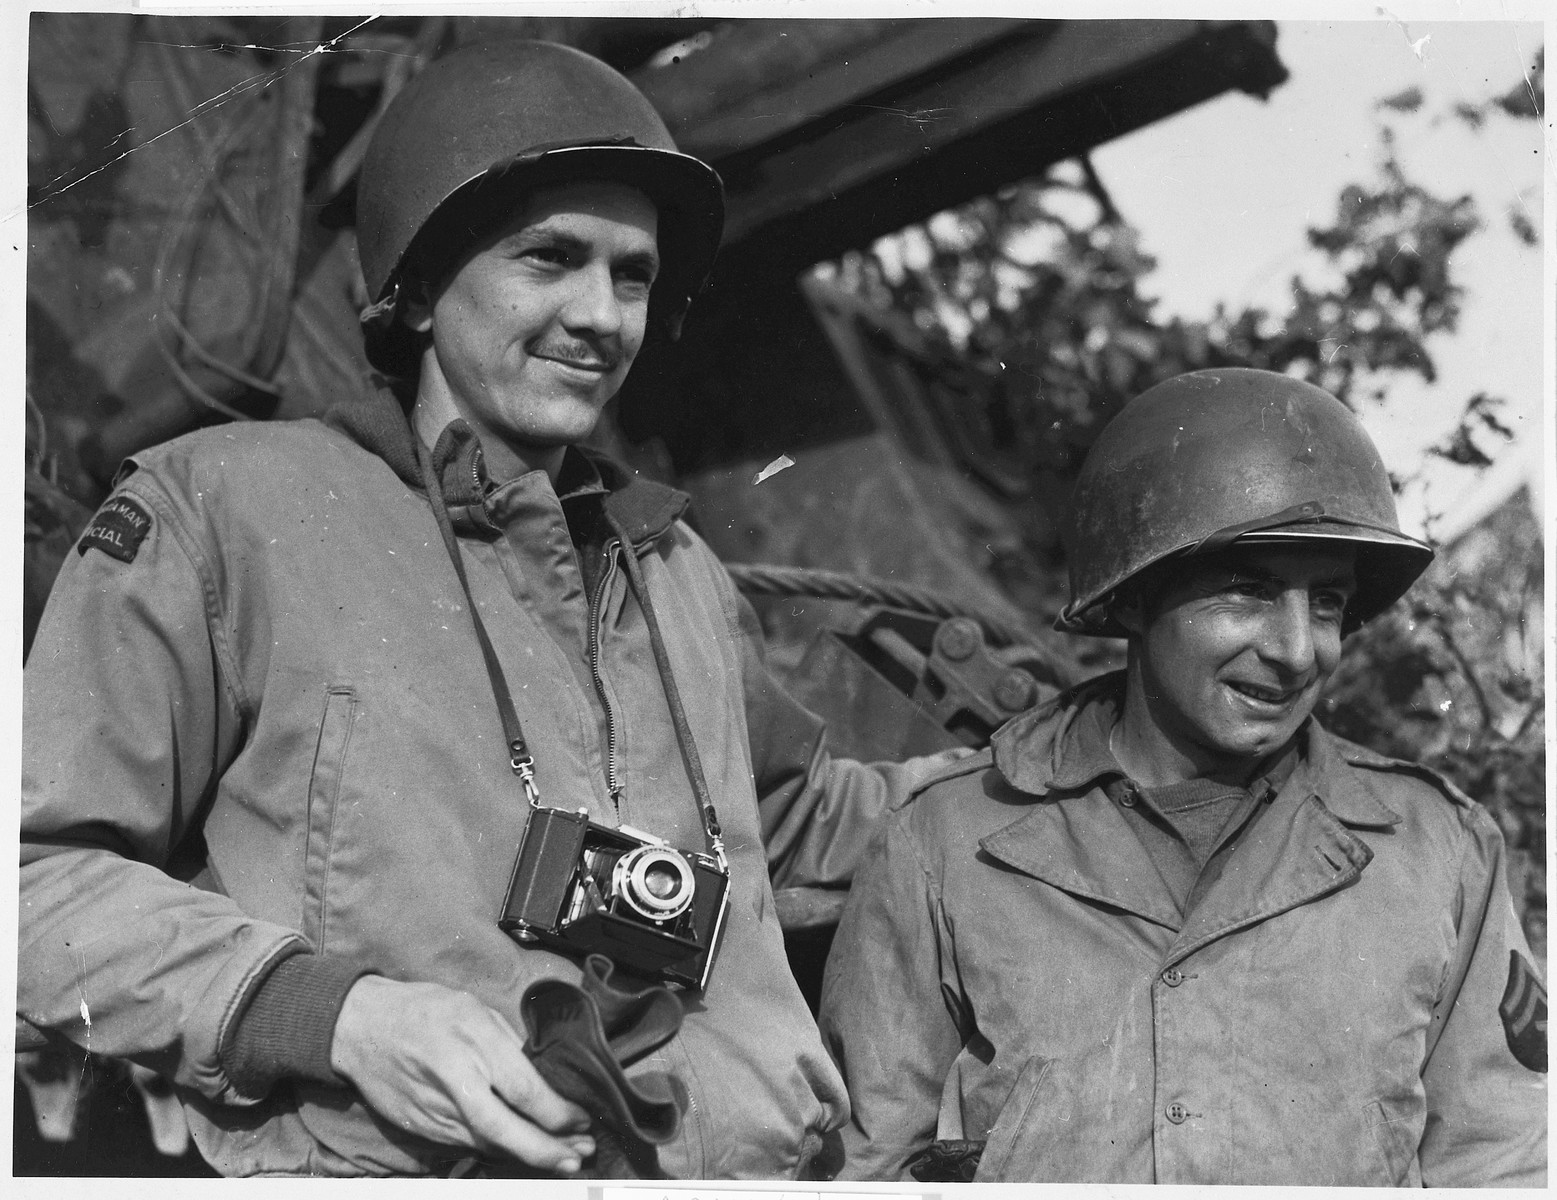 Portrait of two American soldiers from Tacoma, Washington serving in the U.S. Army in Europe during World War II.

Pictured are combat photographer, Arnold E. Samuelson (left) and Marvin R. Carter, an artilleryman attached to the same unit.